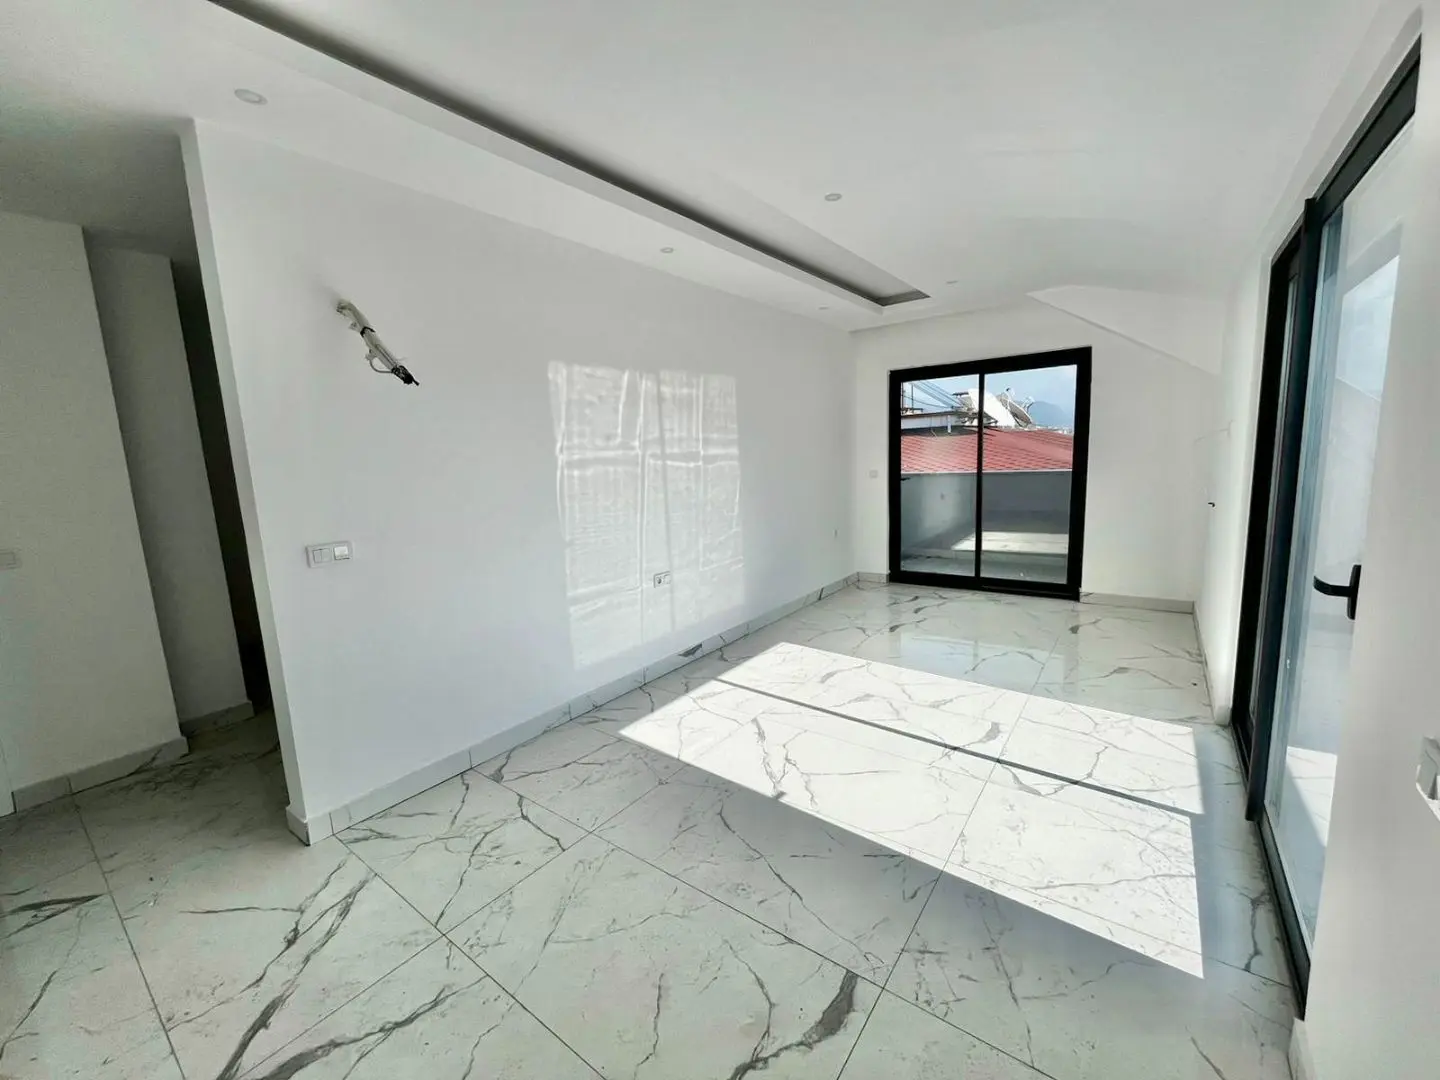 NEW 3+1 DUPLEX FLAT IN A PERFECT LOCATION IN ALANYA